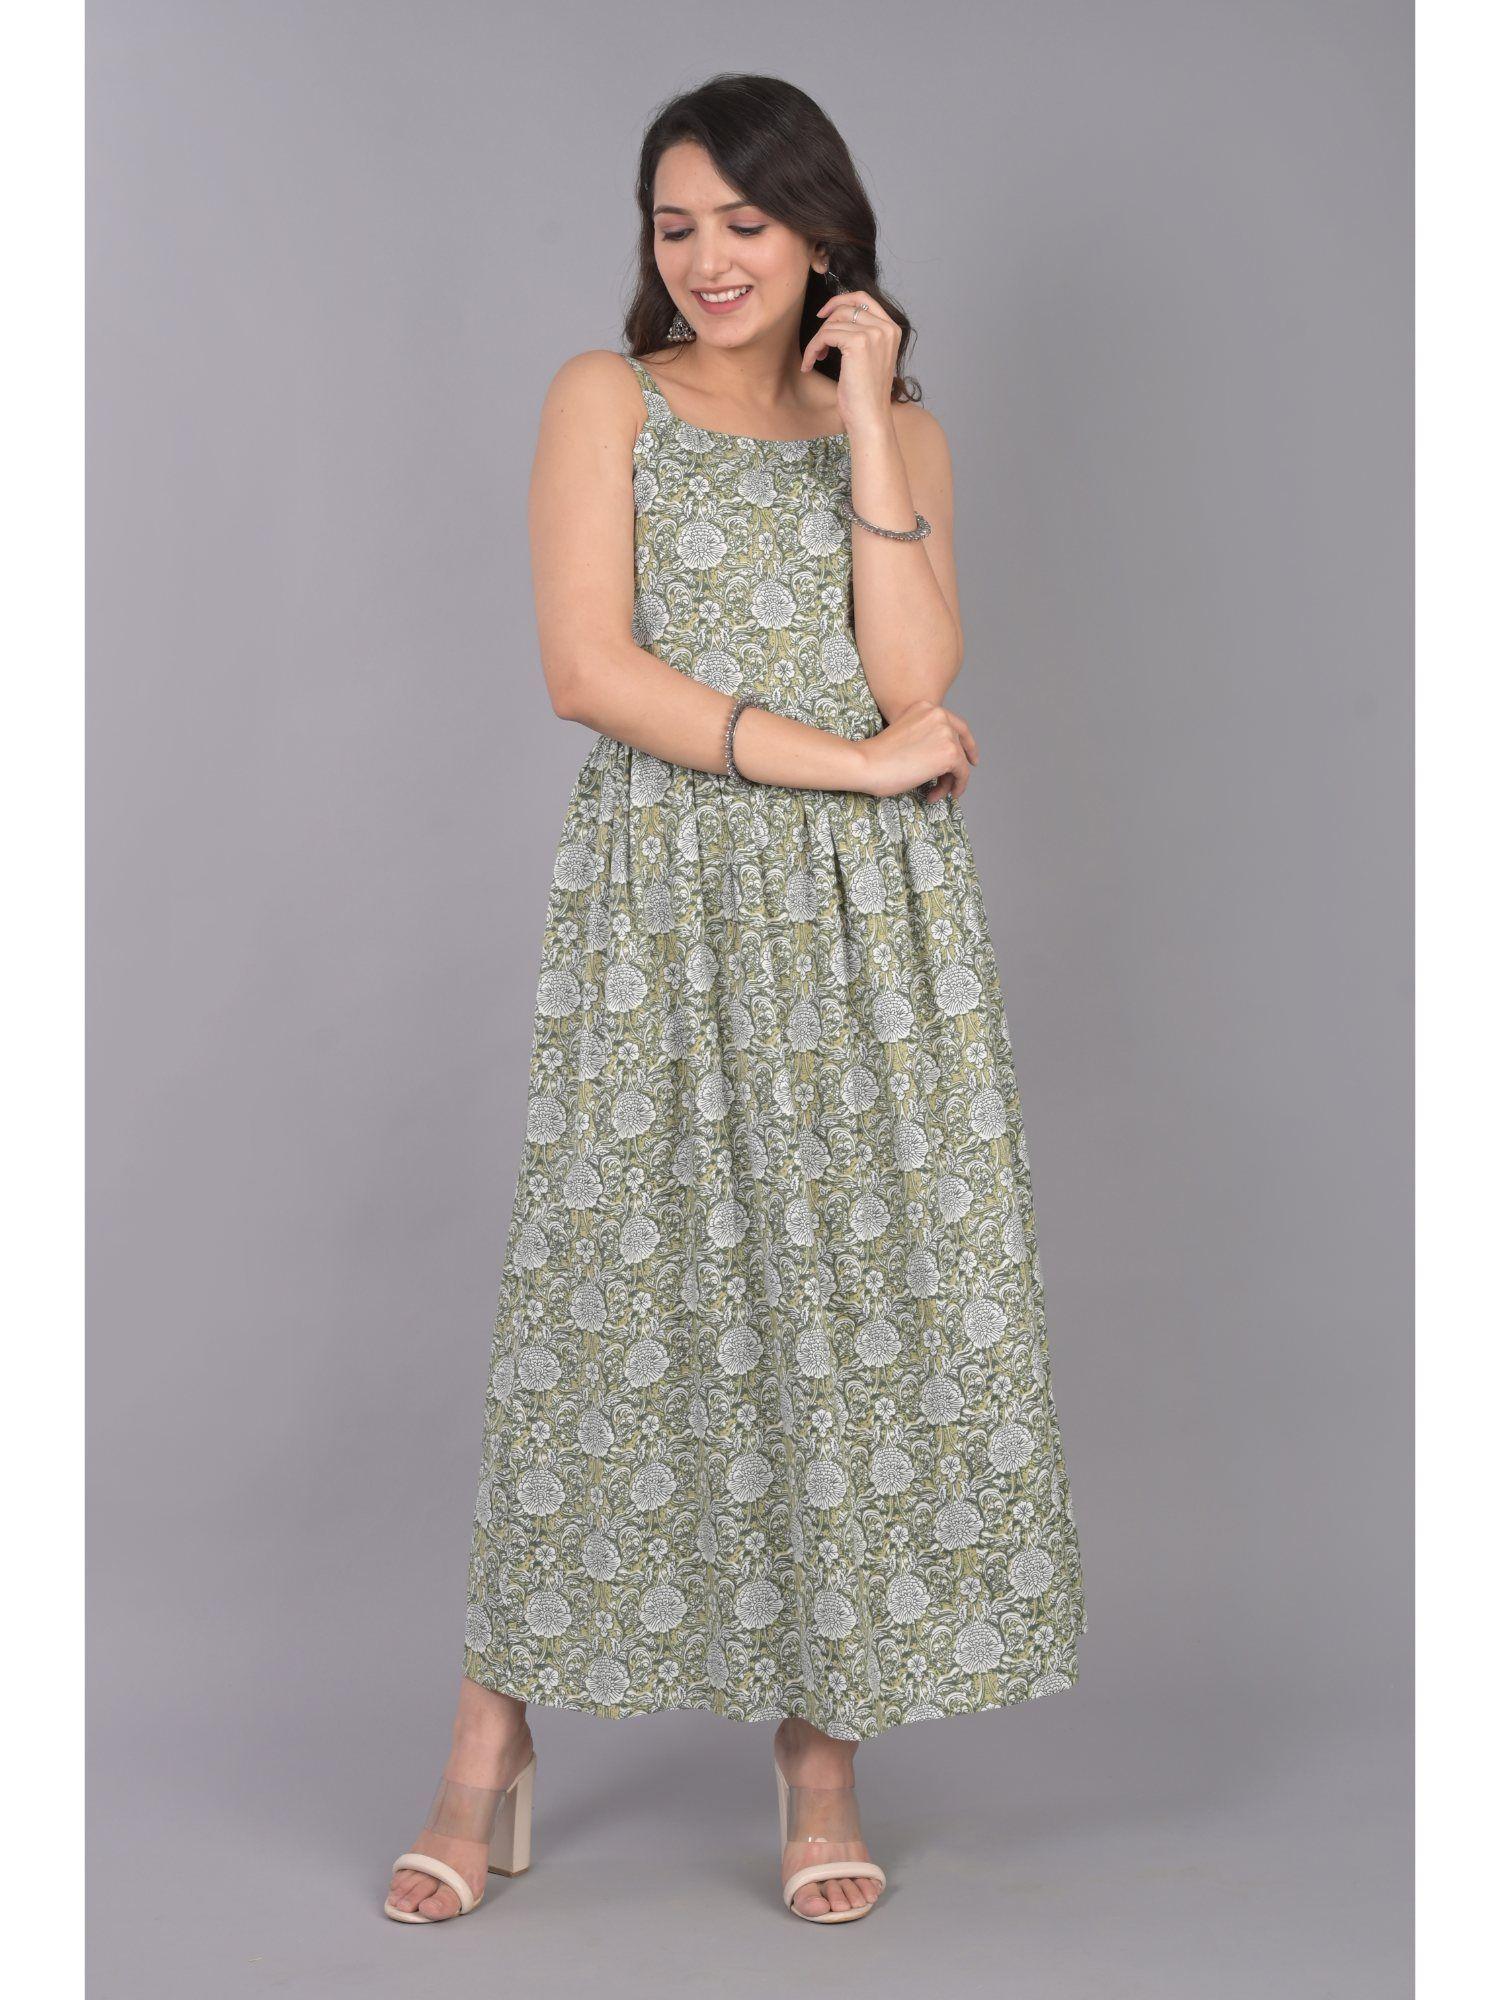 green cotton printed dress with floral motifs